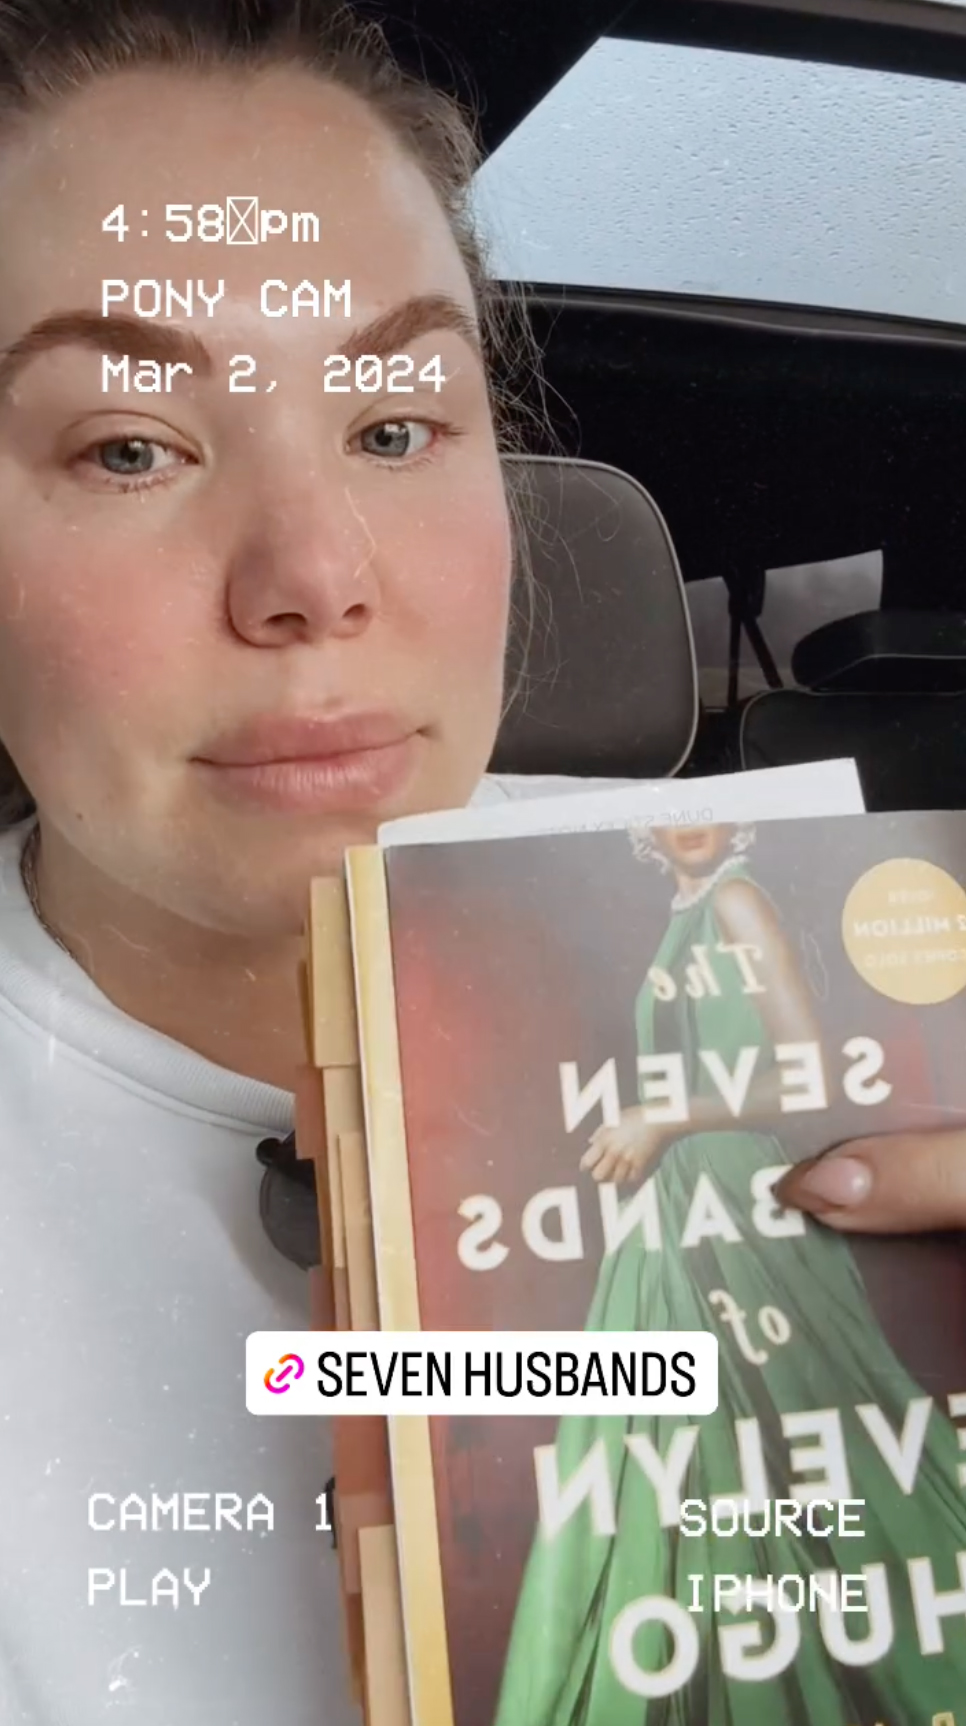 Kailyn made an emotional confession online